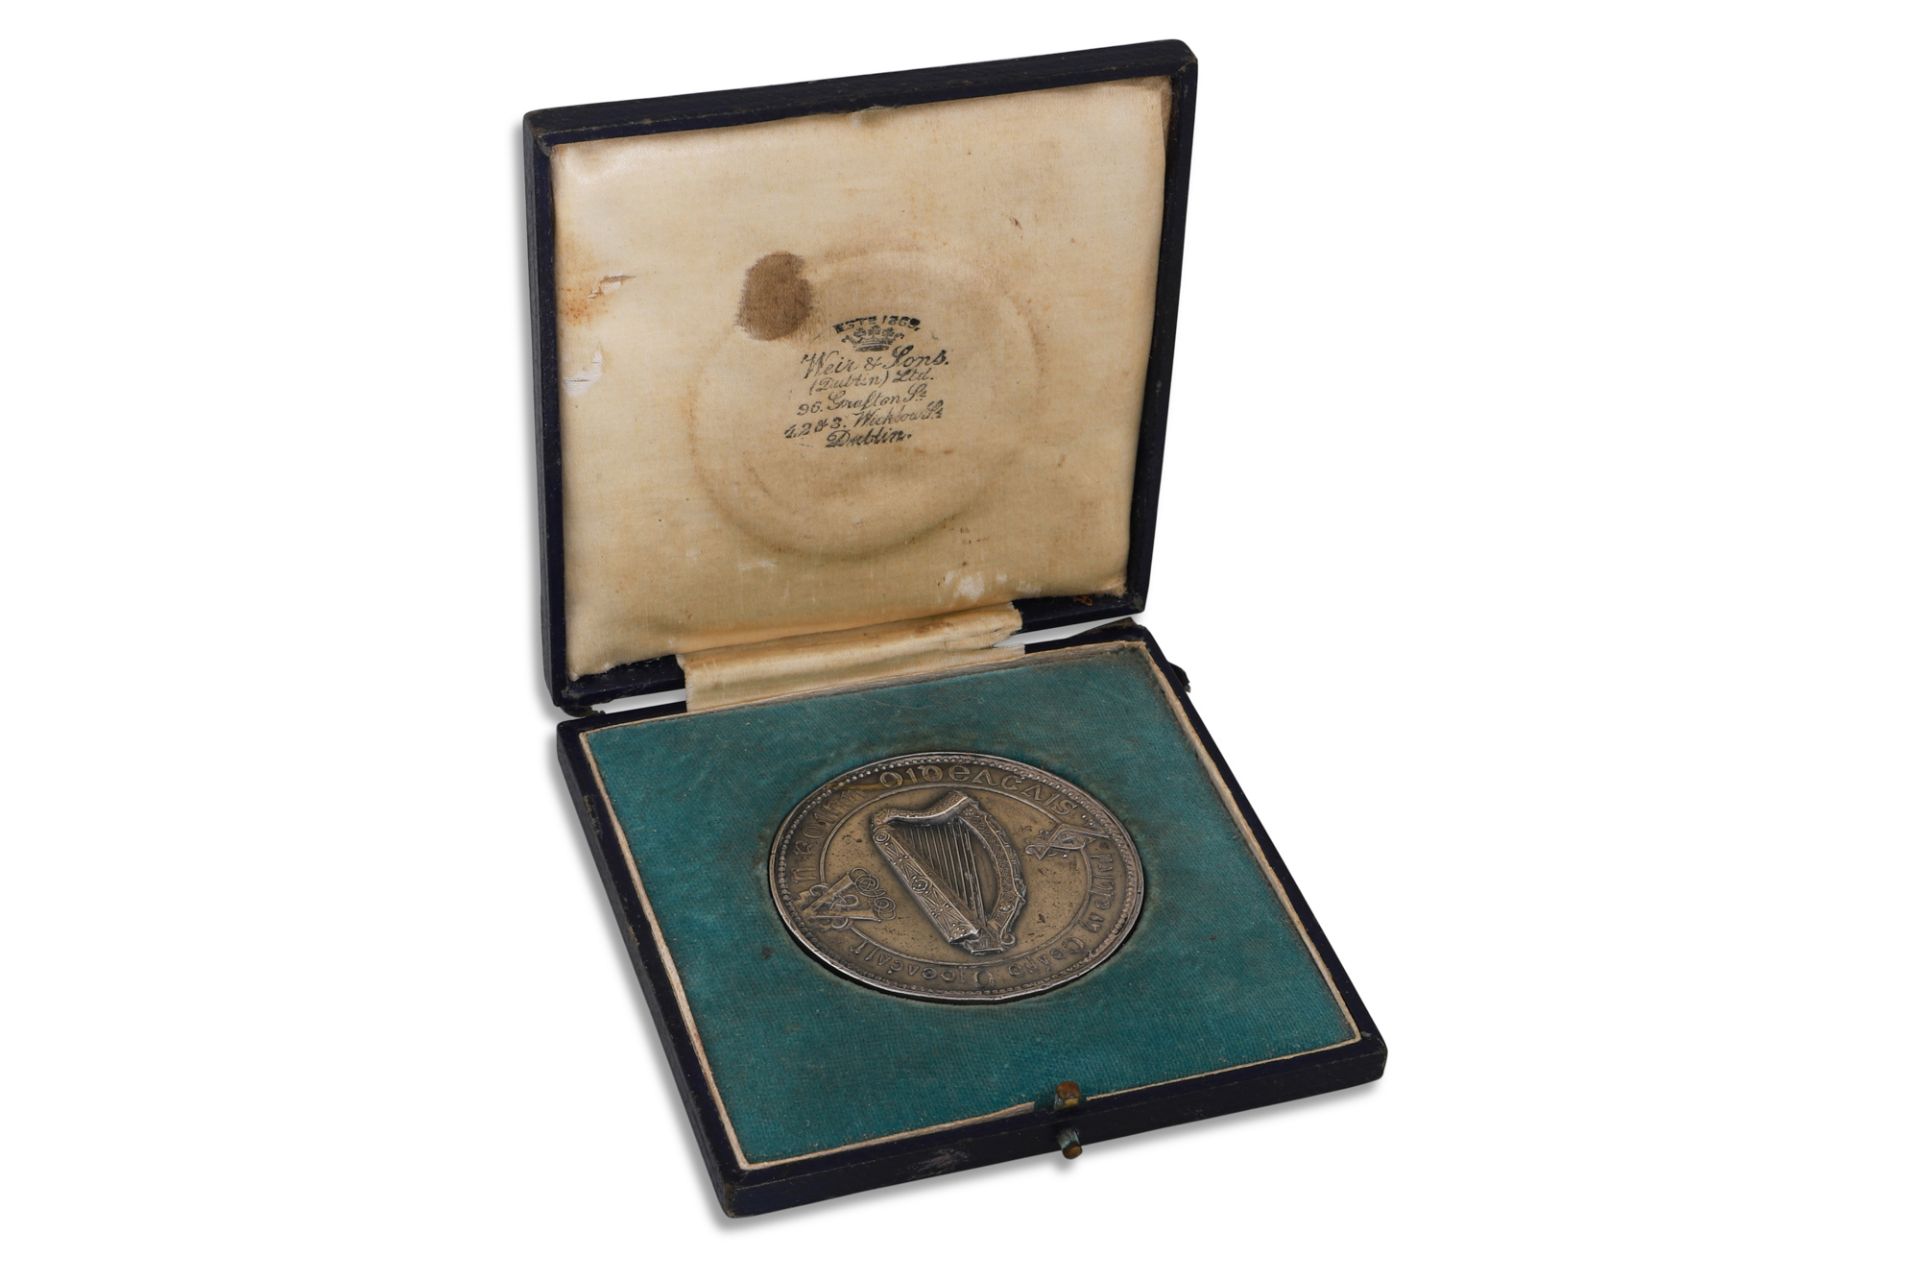 A PRE-EMERGENCY PERIOD BOARD OF EDUCATION SILVER MEDAL, in original case, Longford, 1937, by